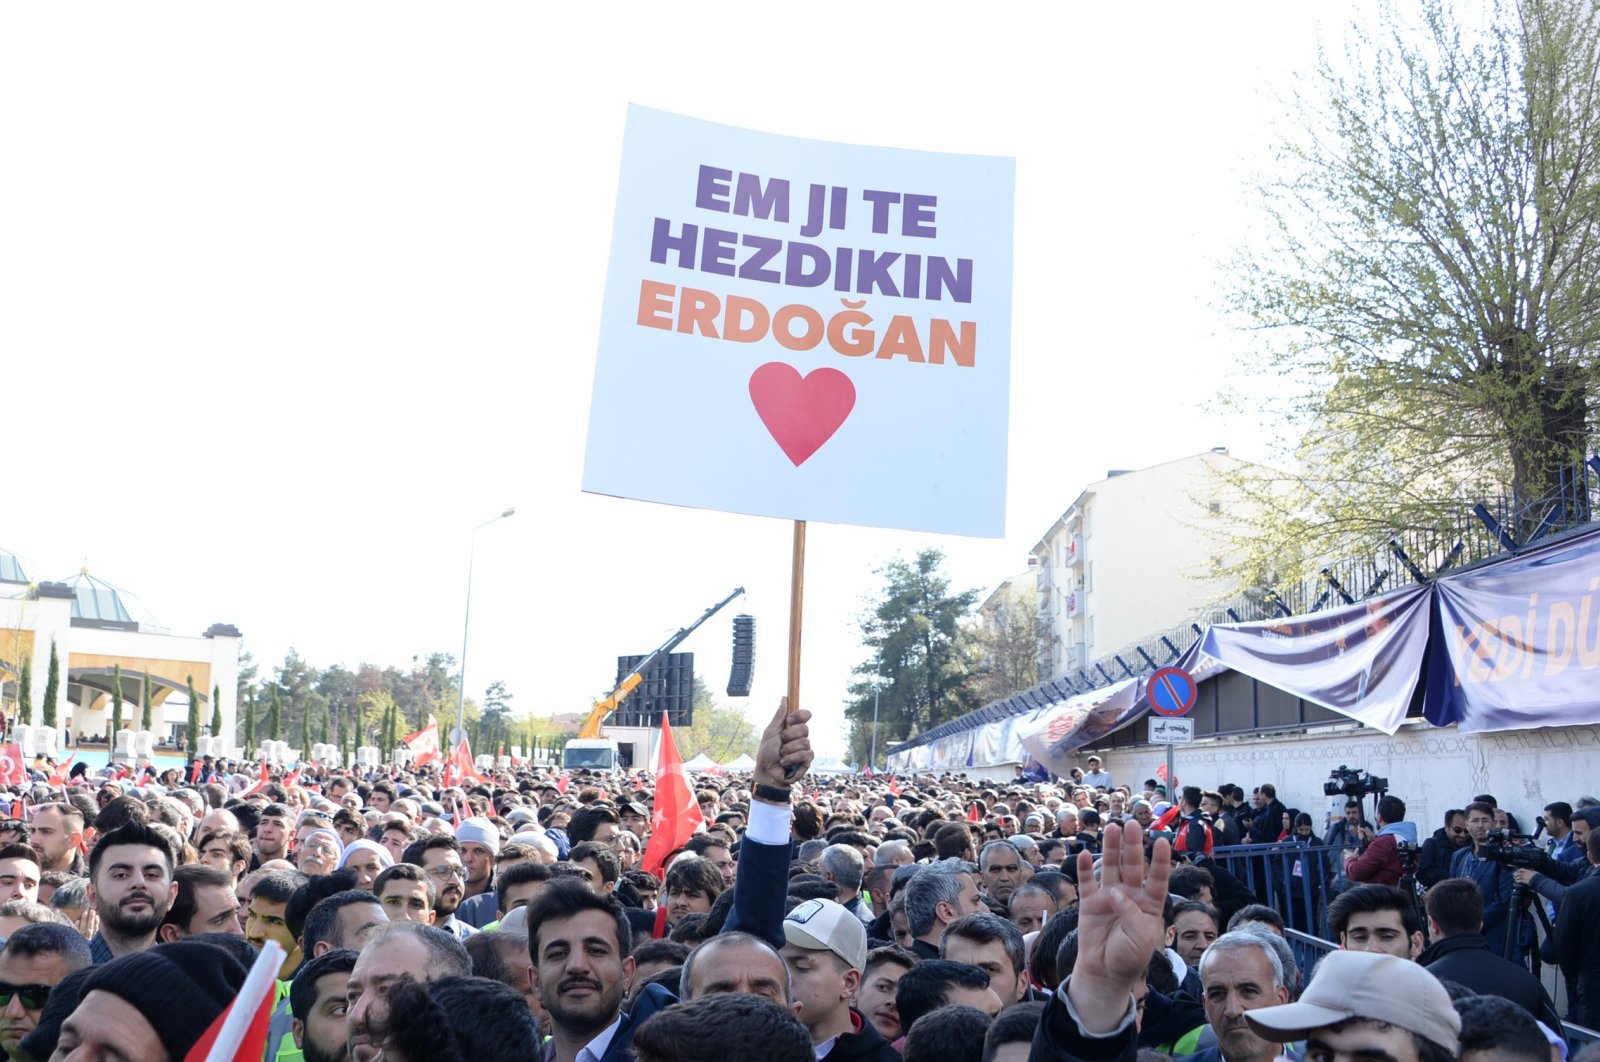 A supporter of President Recep Tayyip Erdoğan holds up a sign that reads "We love you, Erdoğan" in Kurdish during a ceremony in the southeastern Diyarbakır province, Türkiye, April 14, 2023. (DHA Photo)